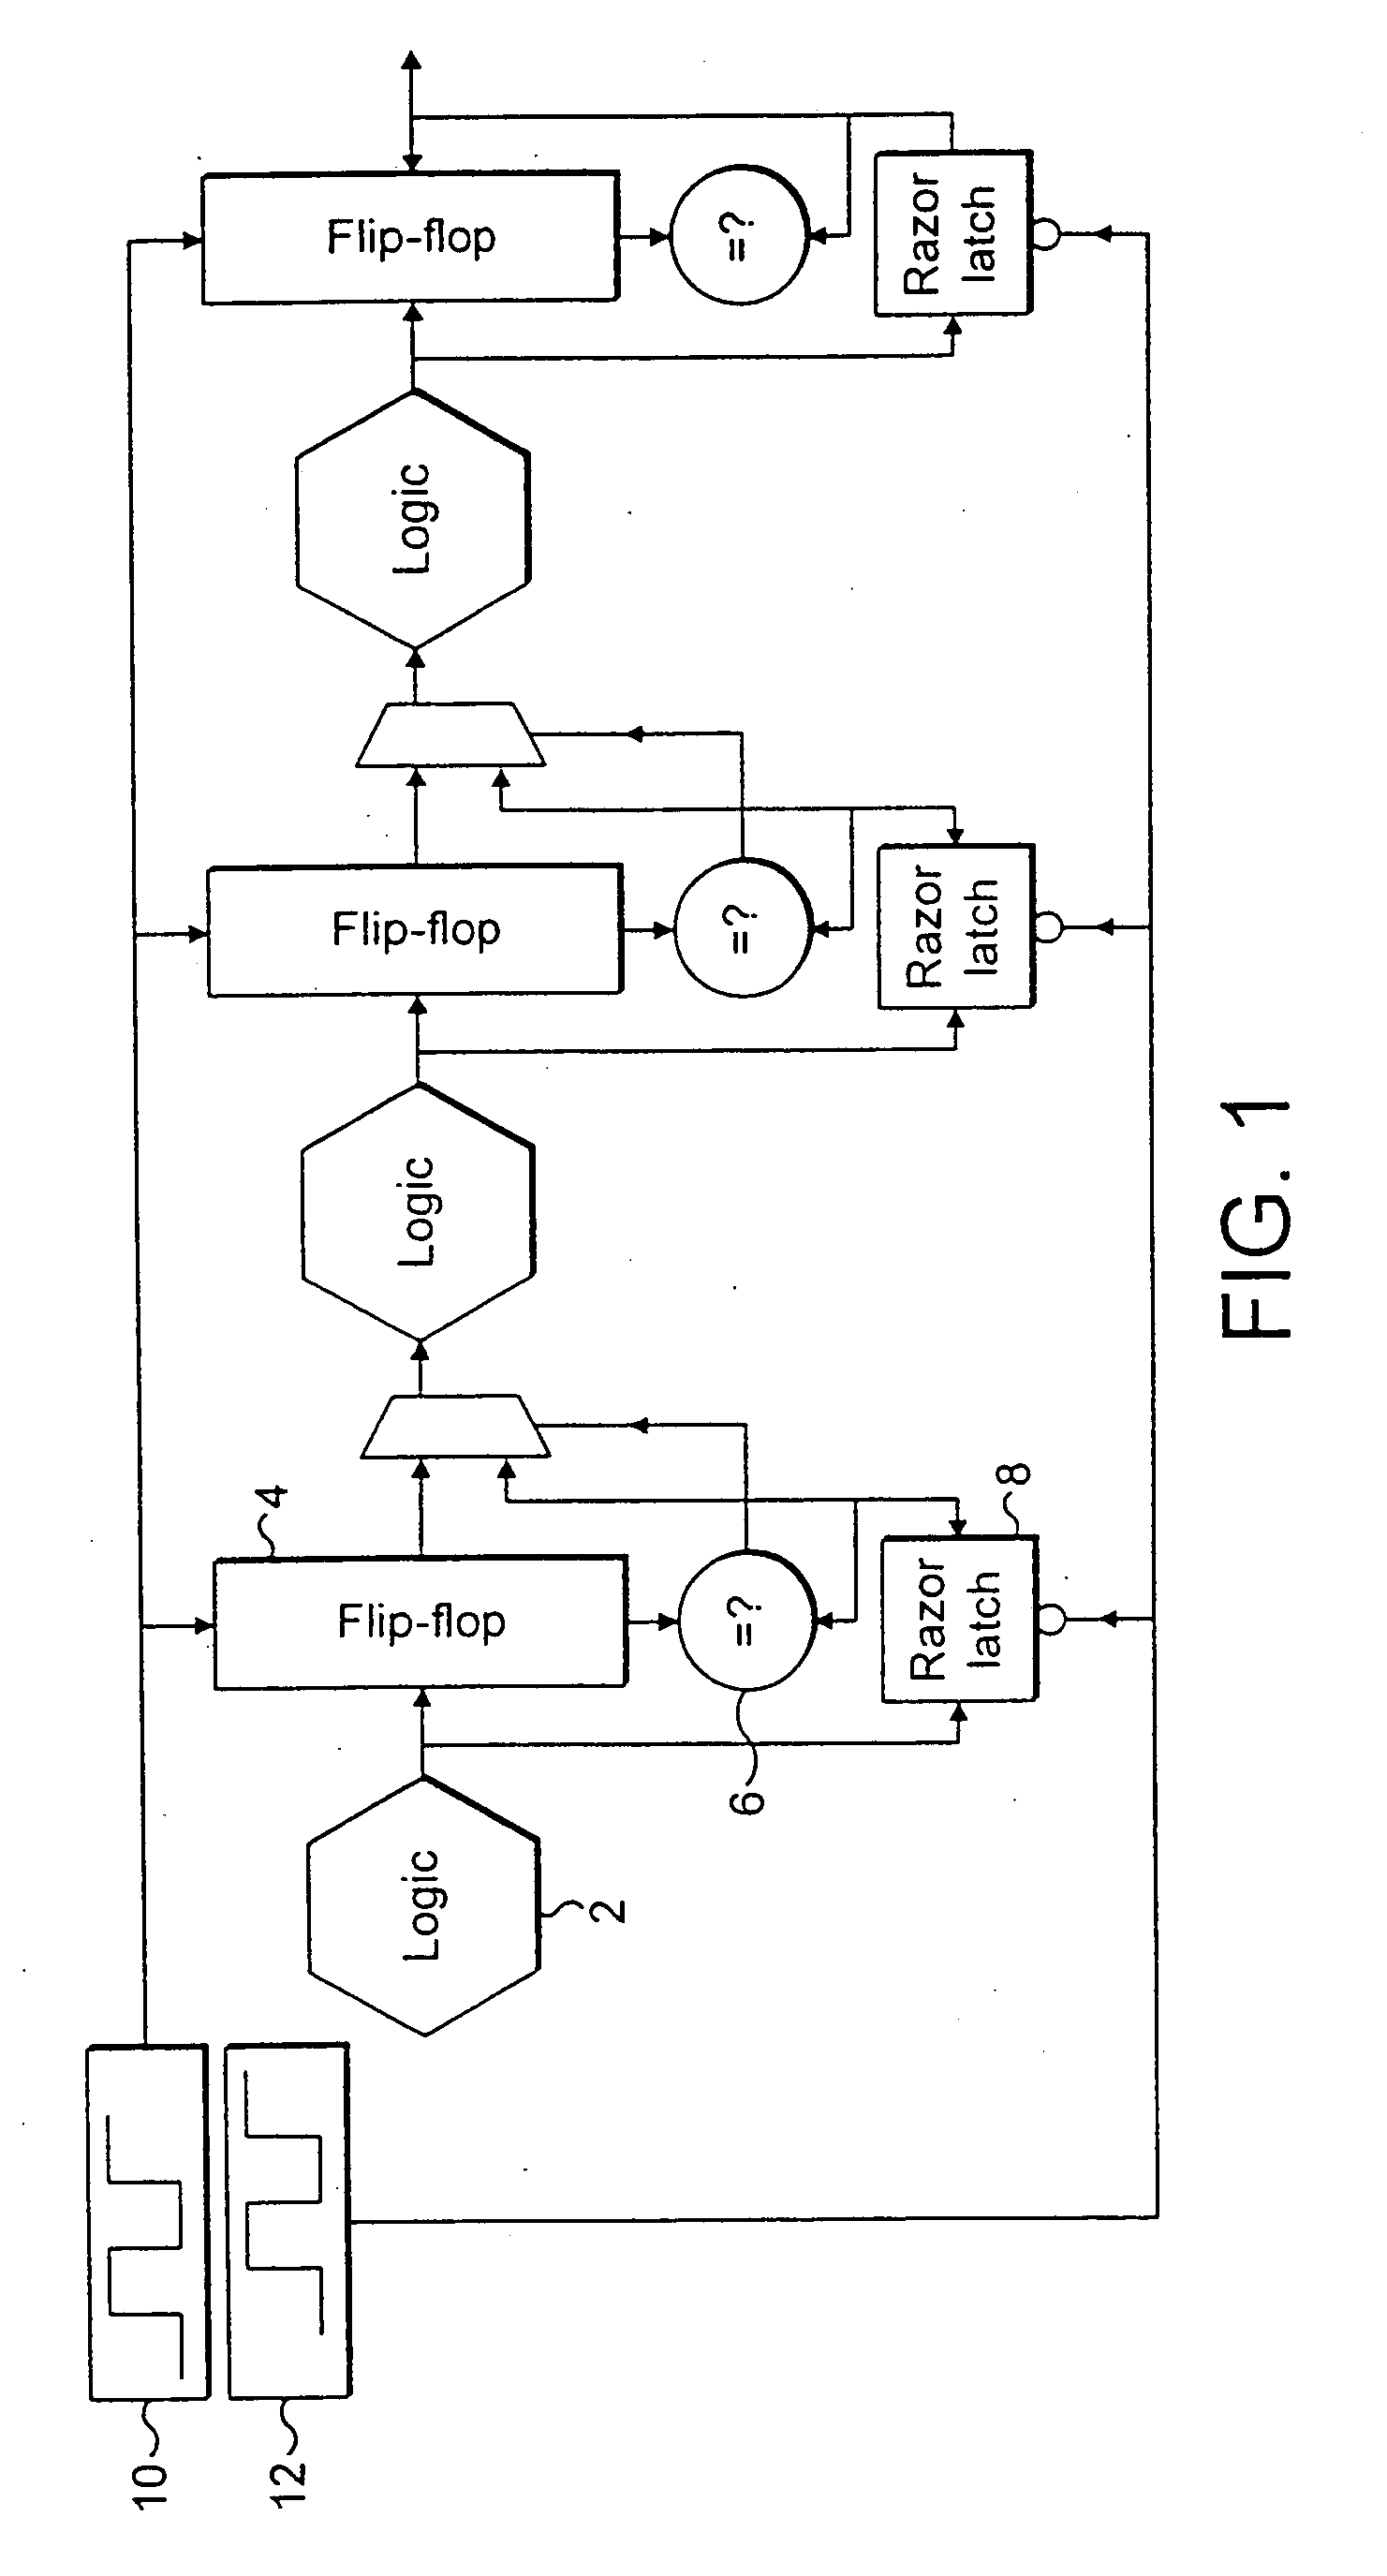 Systematic and random error detection and recovery within processing stages of an integrated circuit